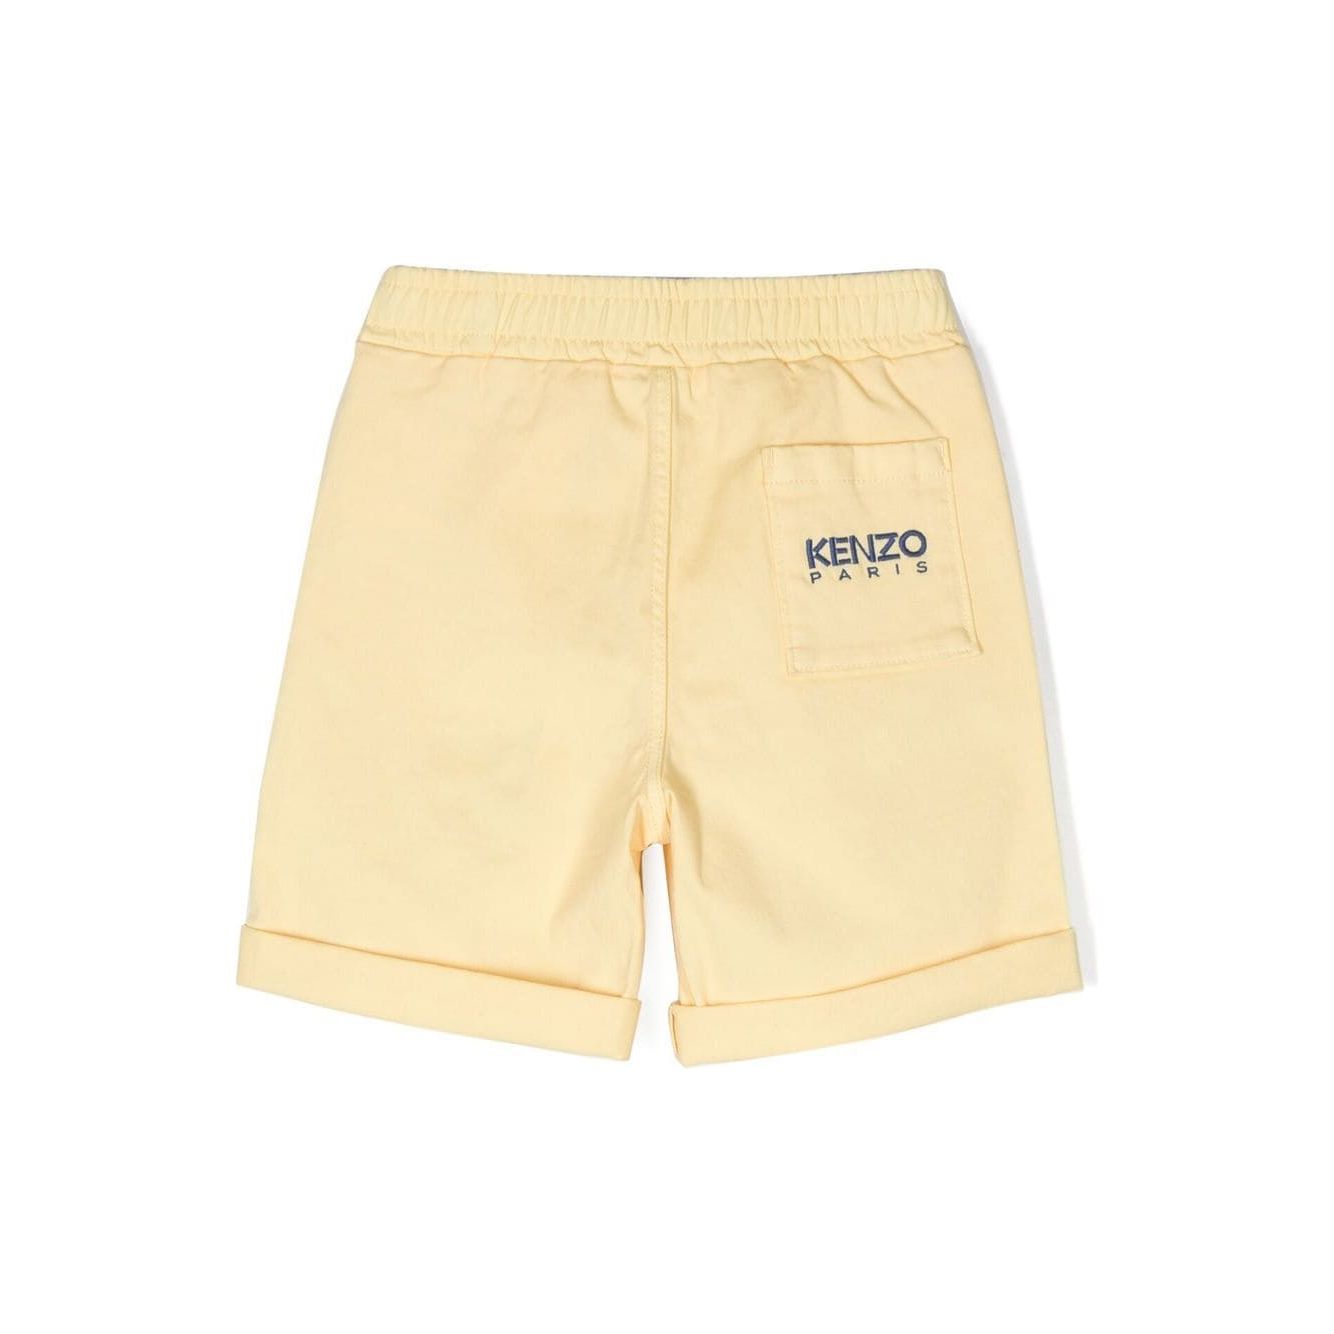 EMBROIDERED LOGO SHORTS